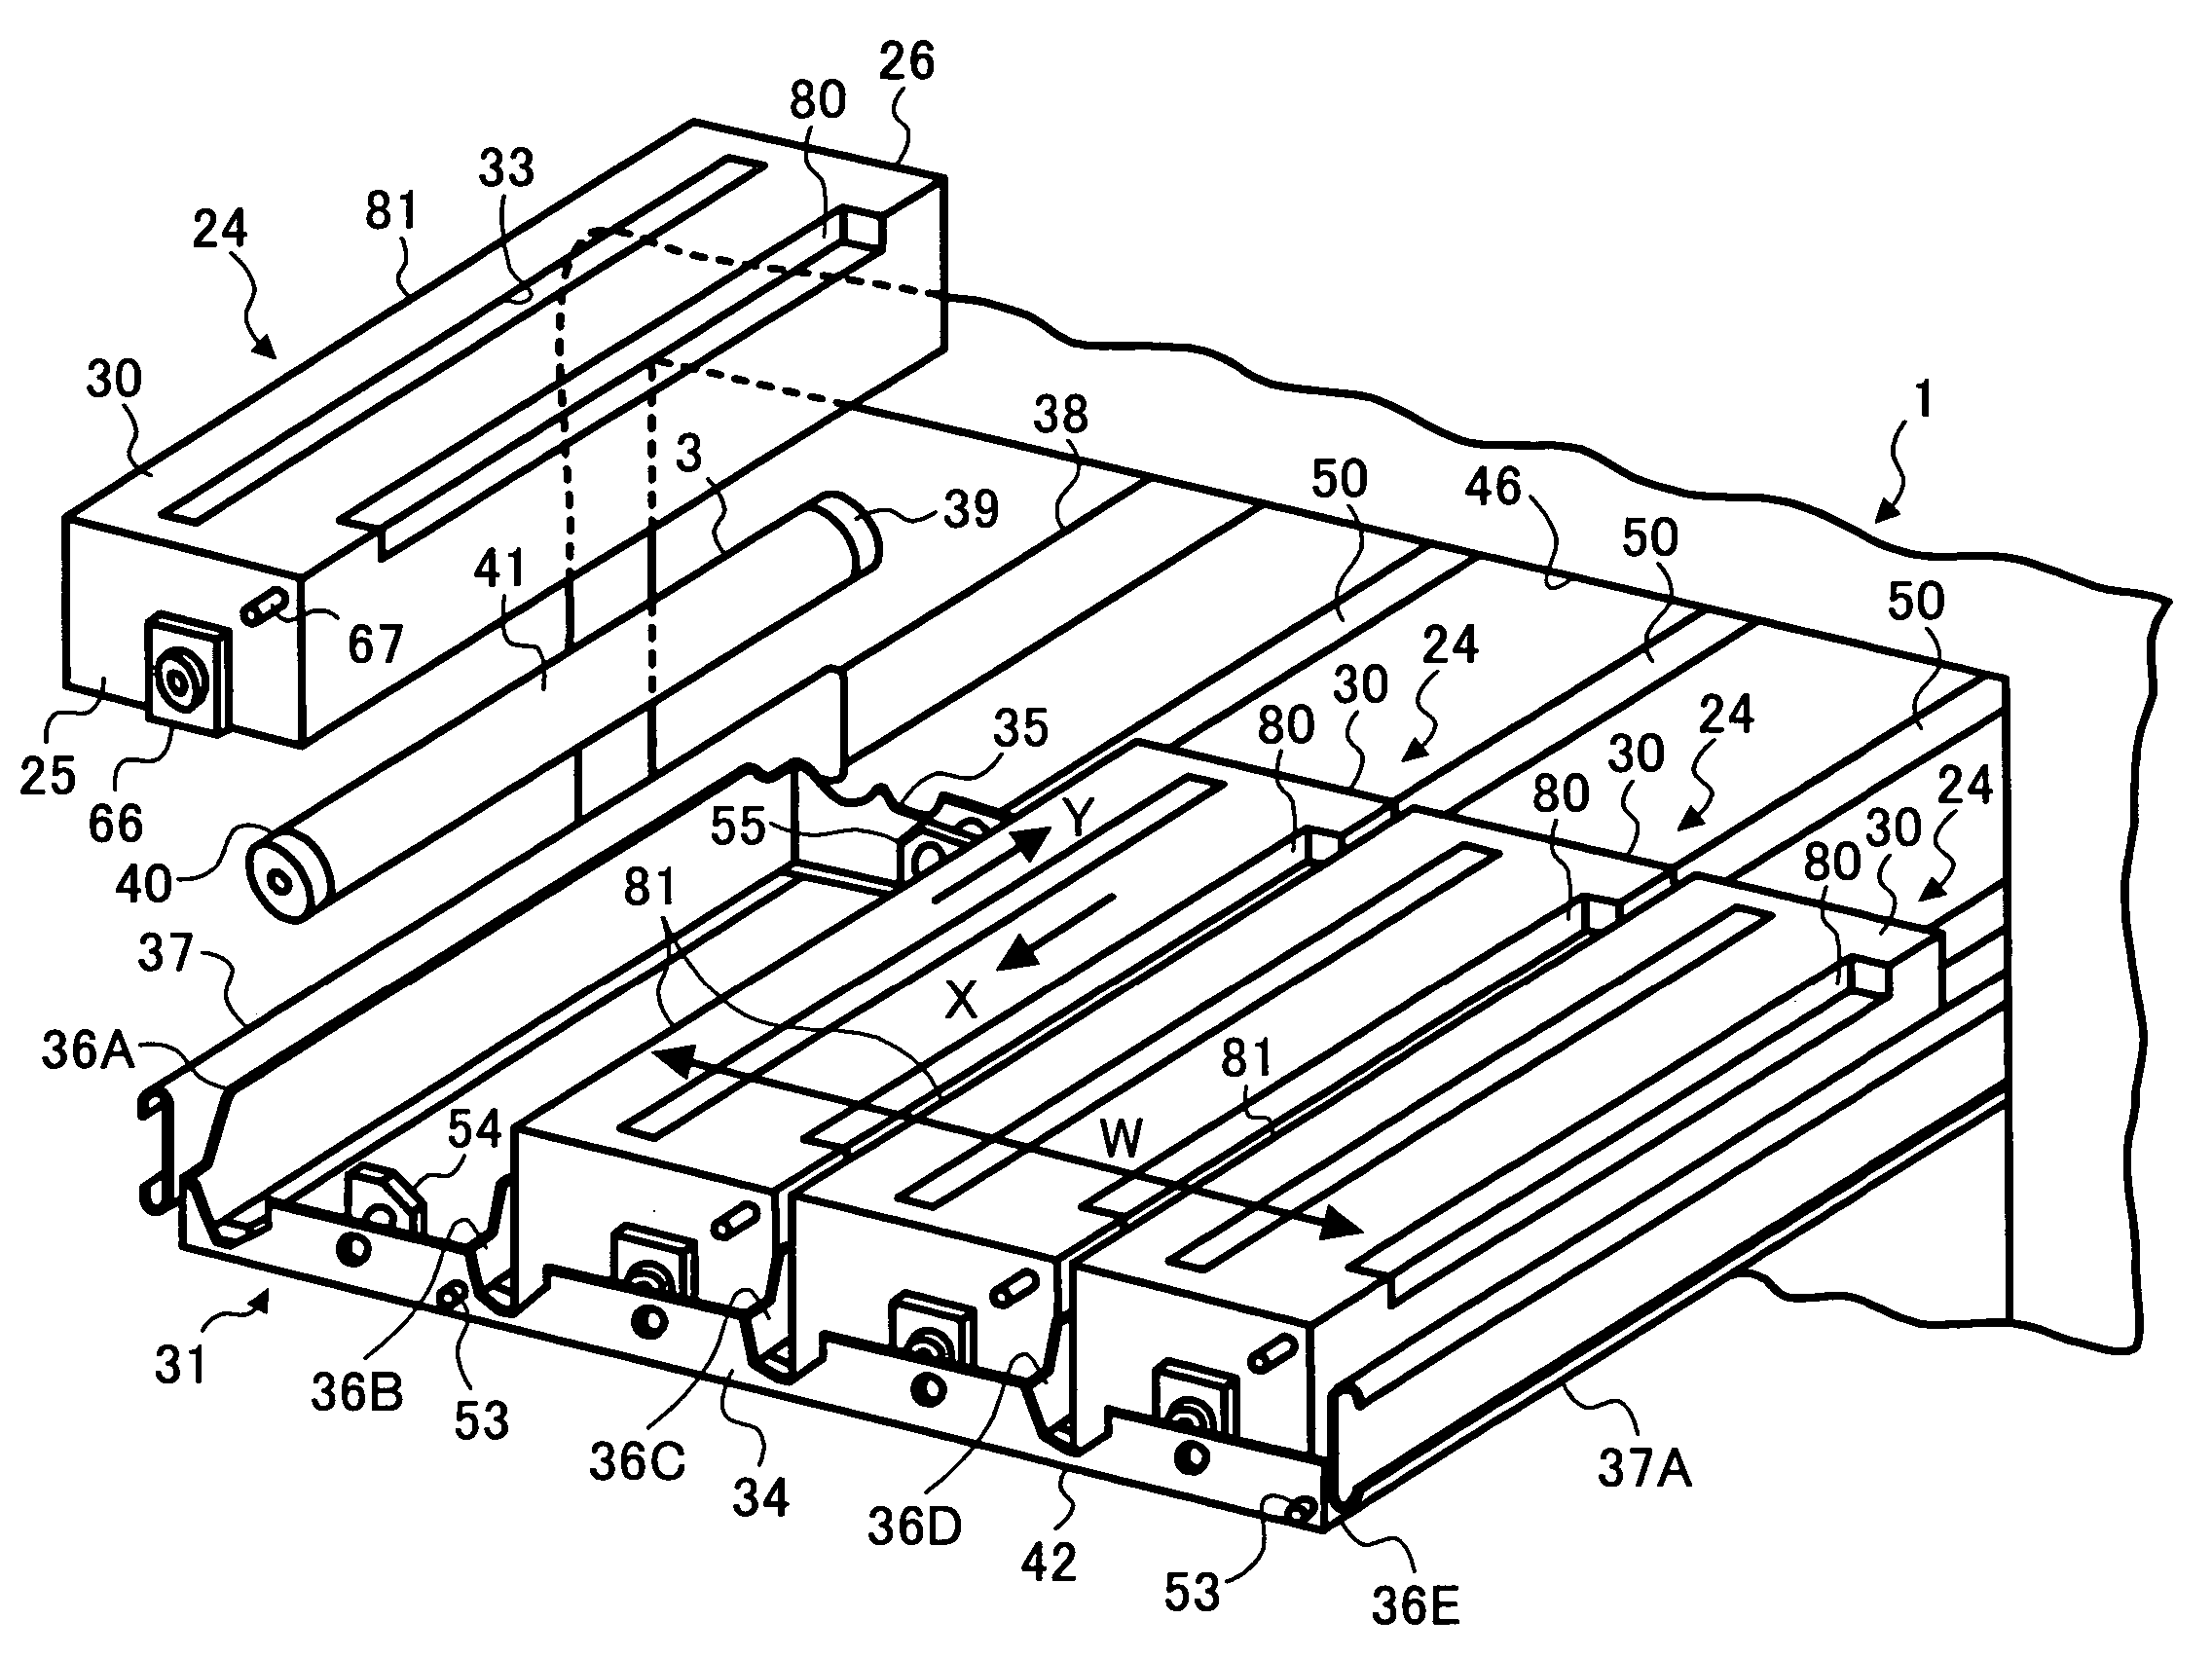 Image forming apparatus and image forming unit